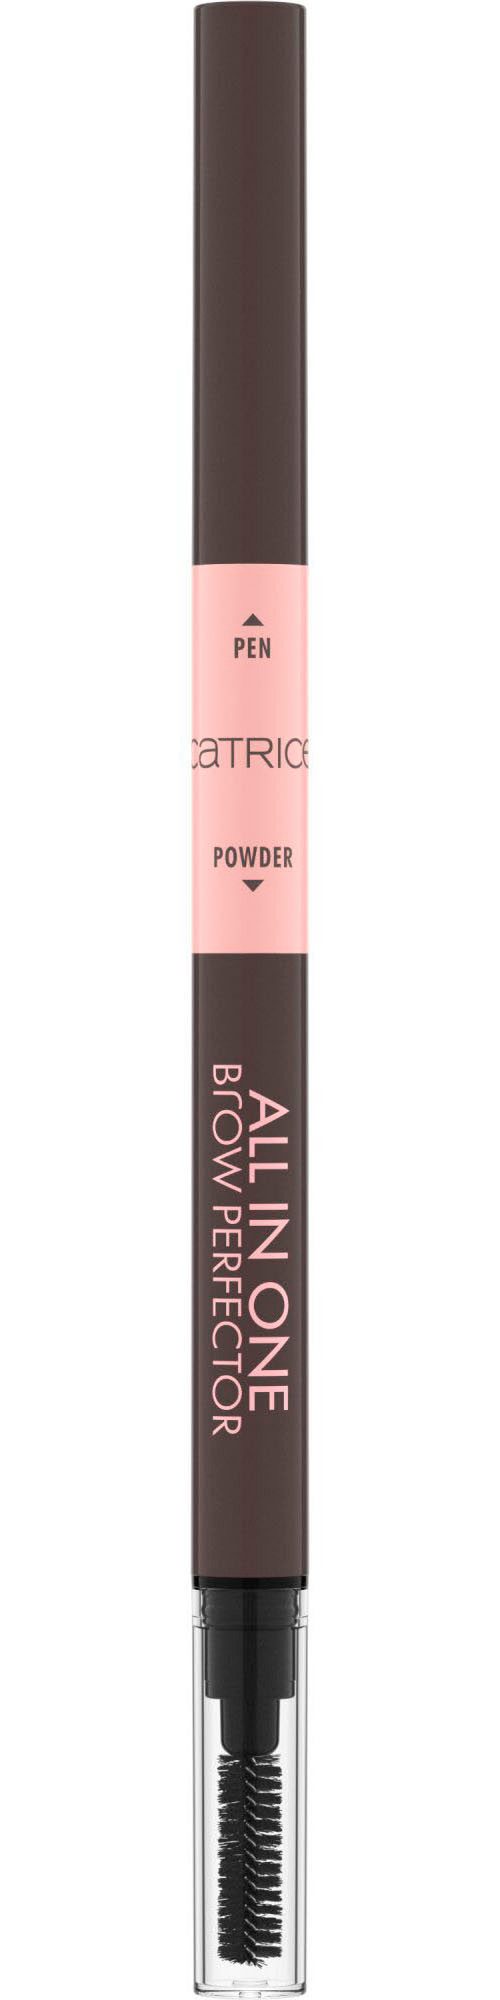 Catrice Augenbrauen-Stift All In One Brow Perfector